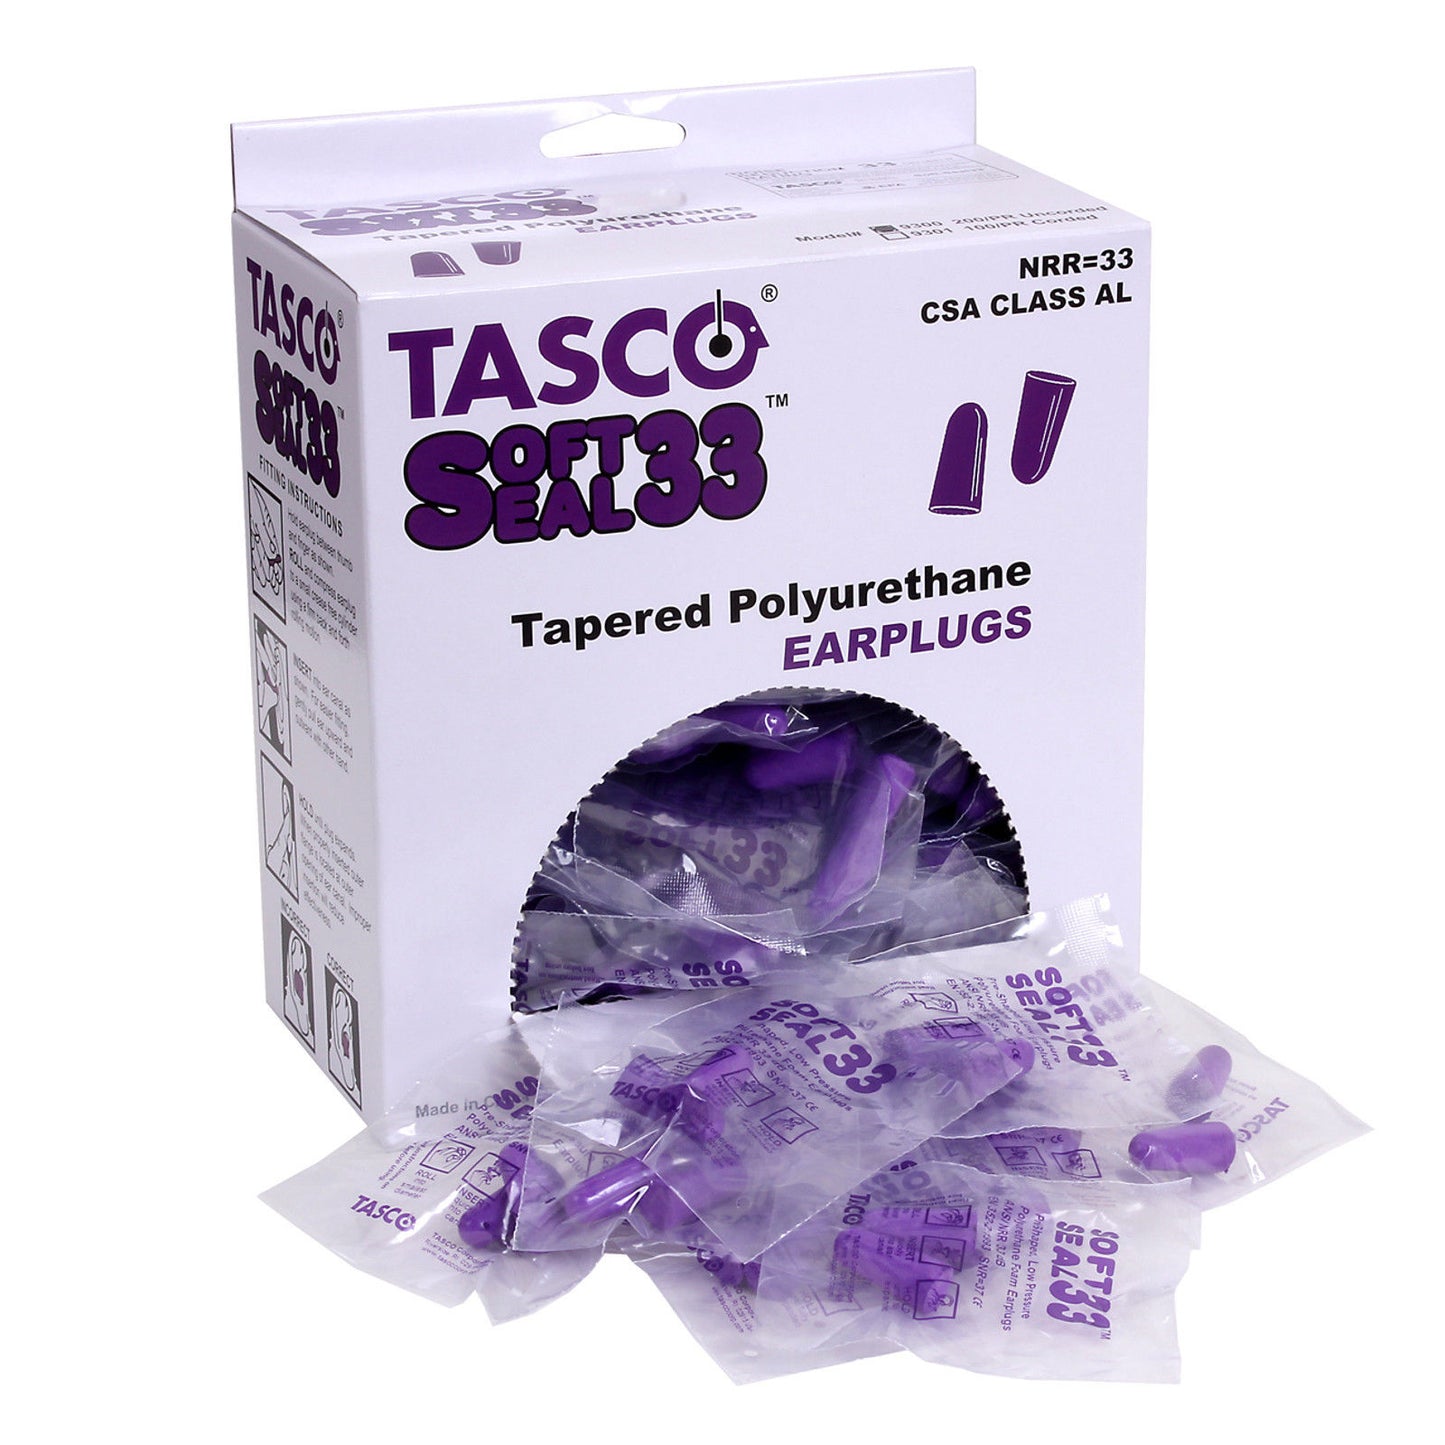 Tasco Non-Corded Disposable Ear Plugs - 200 Pairs - 33dB NRR